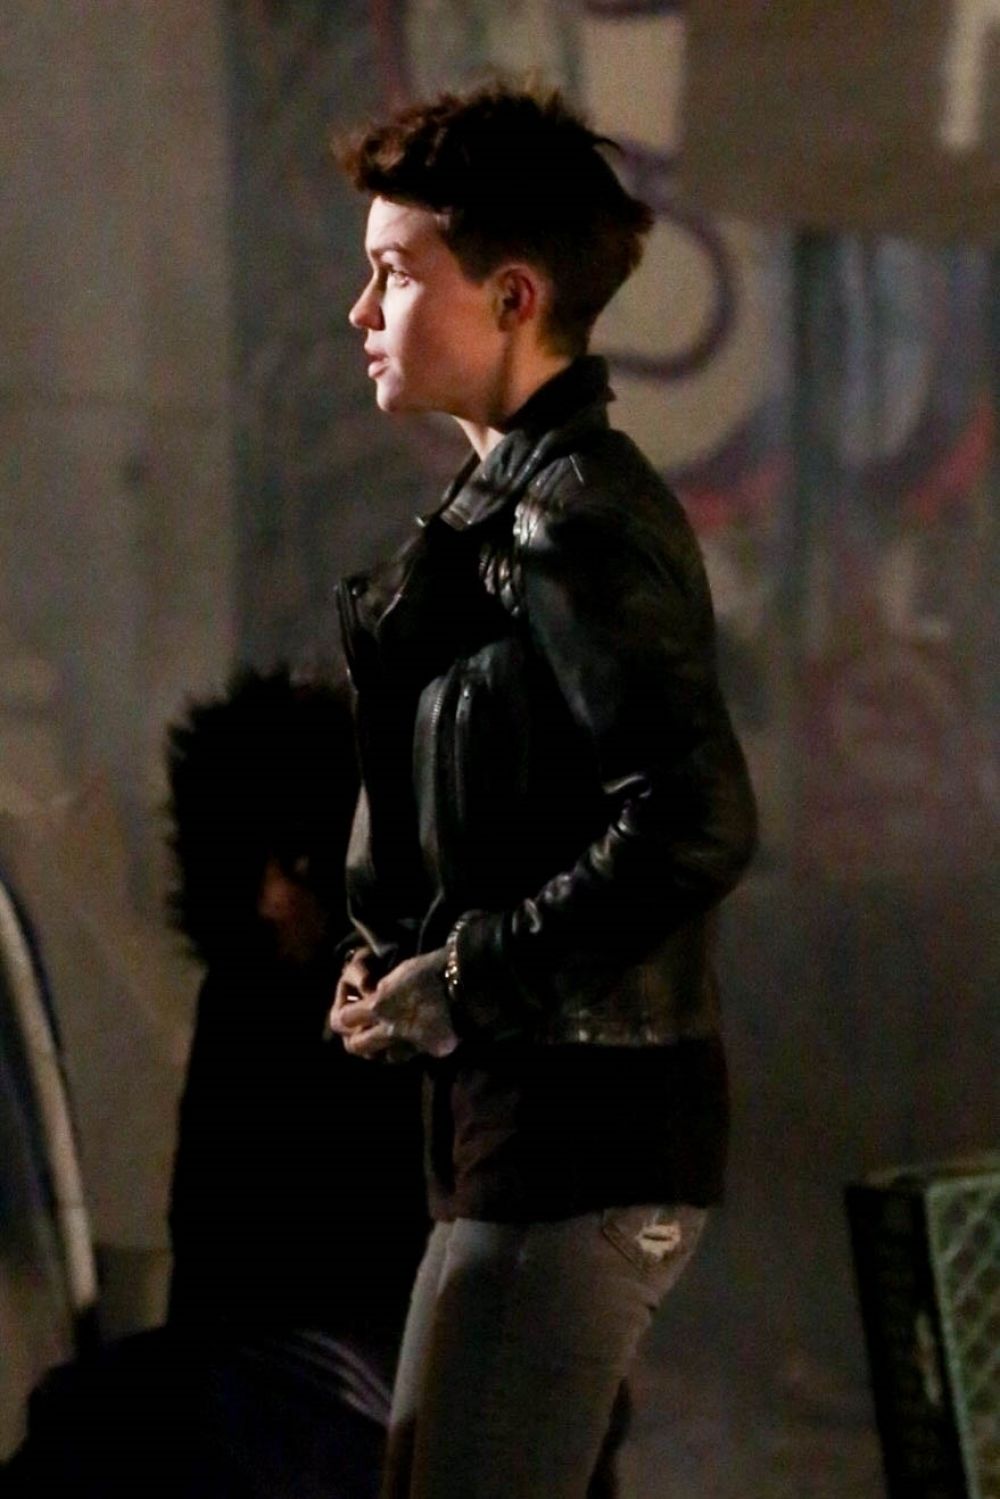 Ruby Rose As Batwoman For Dc’s New Tv Pilot In Chicago 03